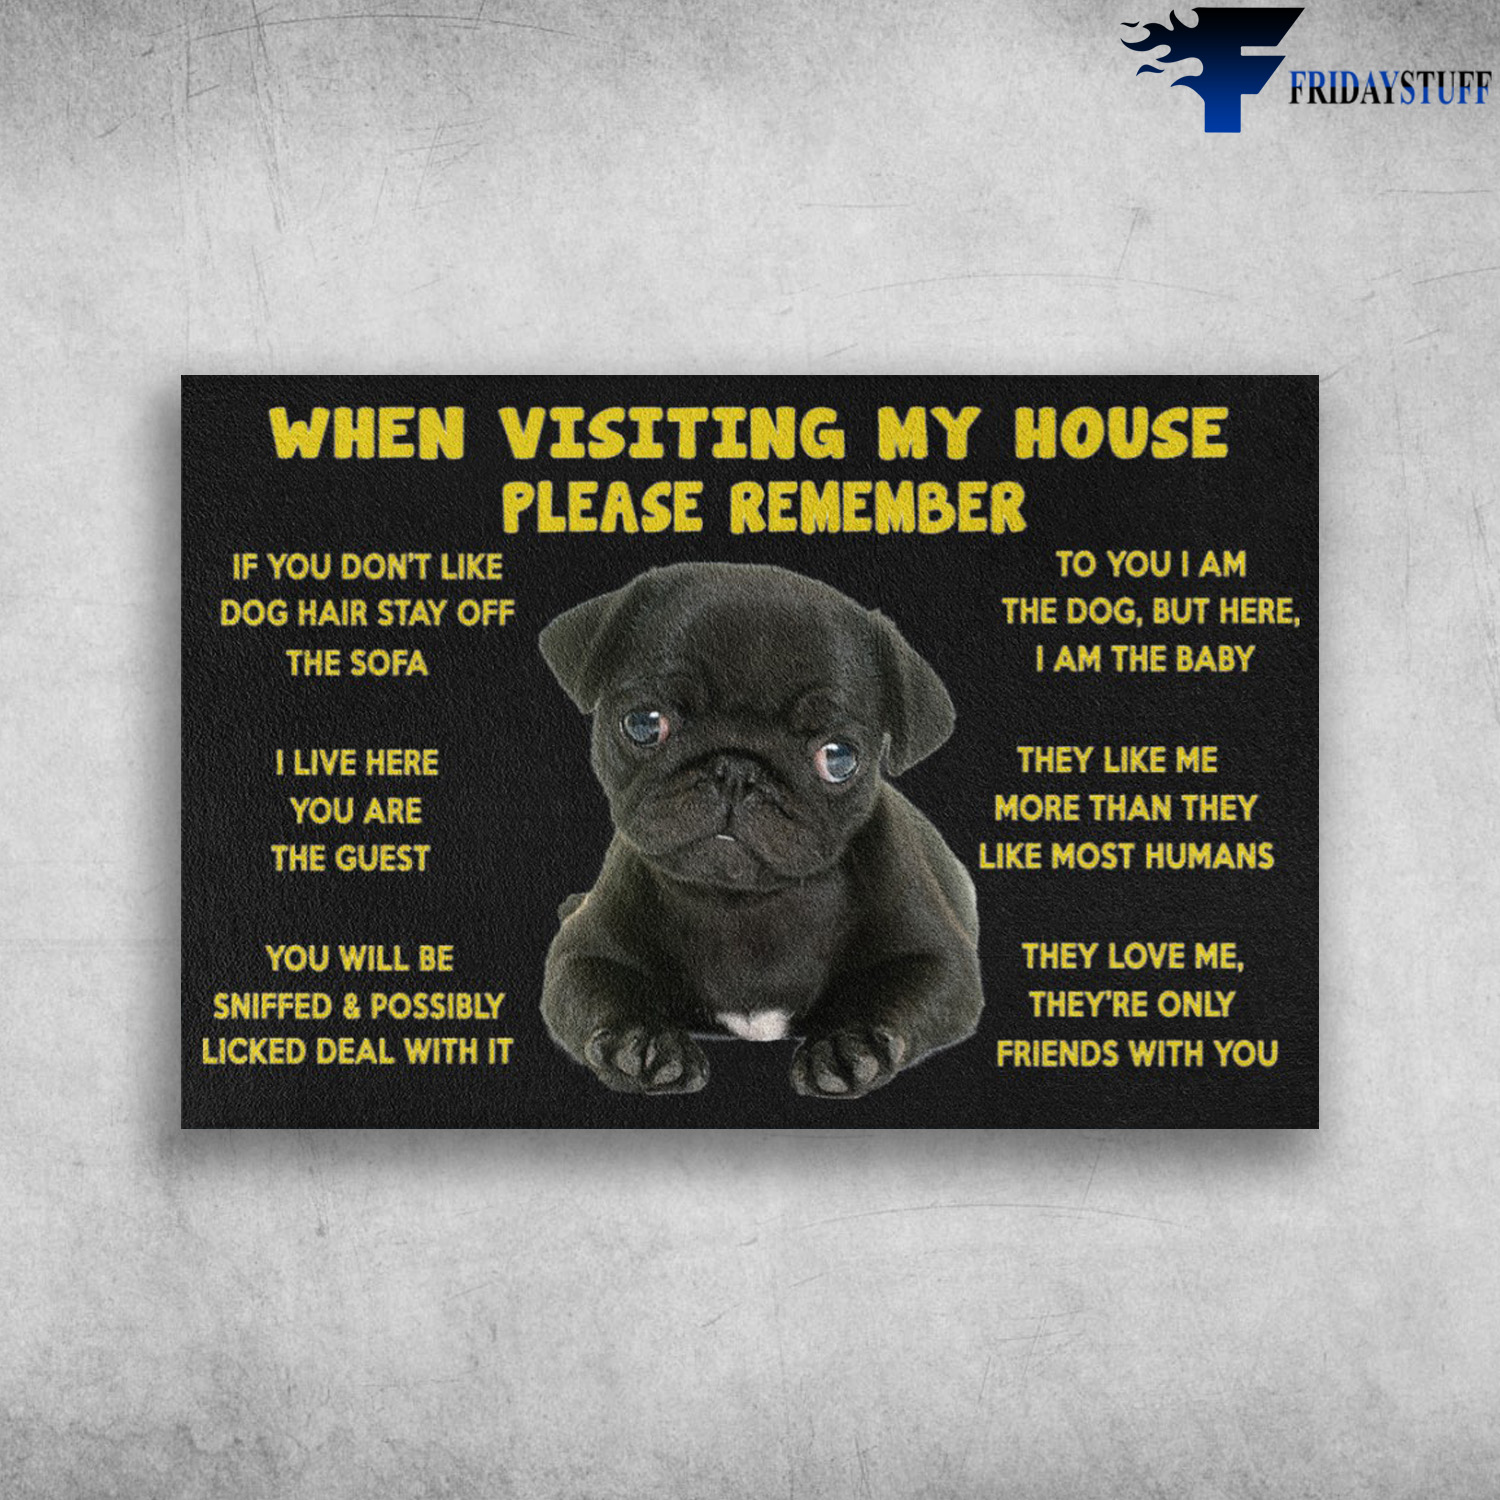 French Bulldog - When Visiting My House, Please Remember, If You Don't Like Dogs Hair Stay Off The Sofa, I Live Here You Are The Guest, You Will Be Sniffed And Possibly Licked Deal With It, To You I Am The Dog, But Here, I Am The Baby